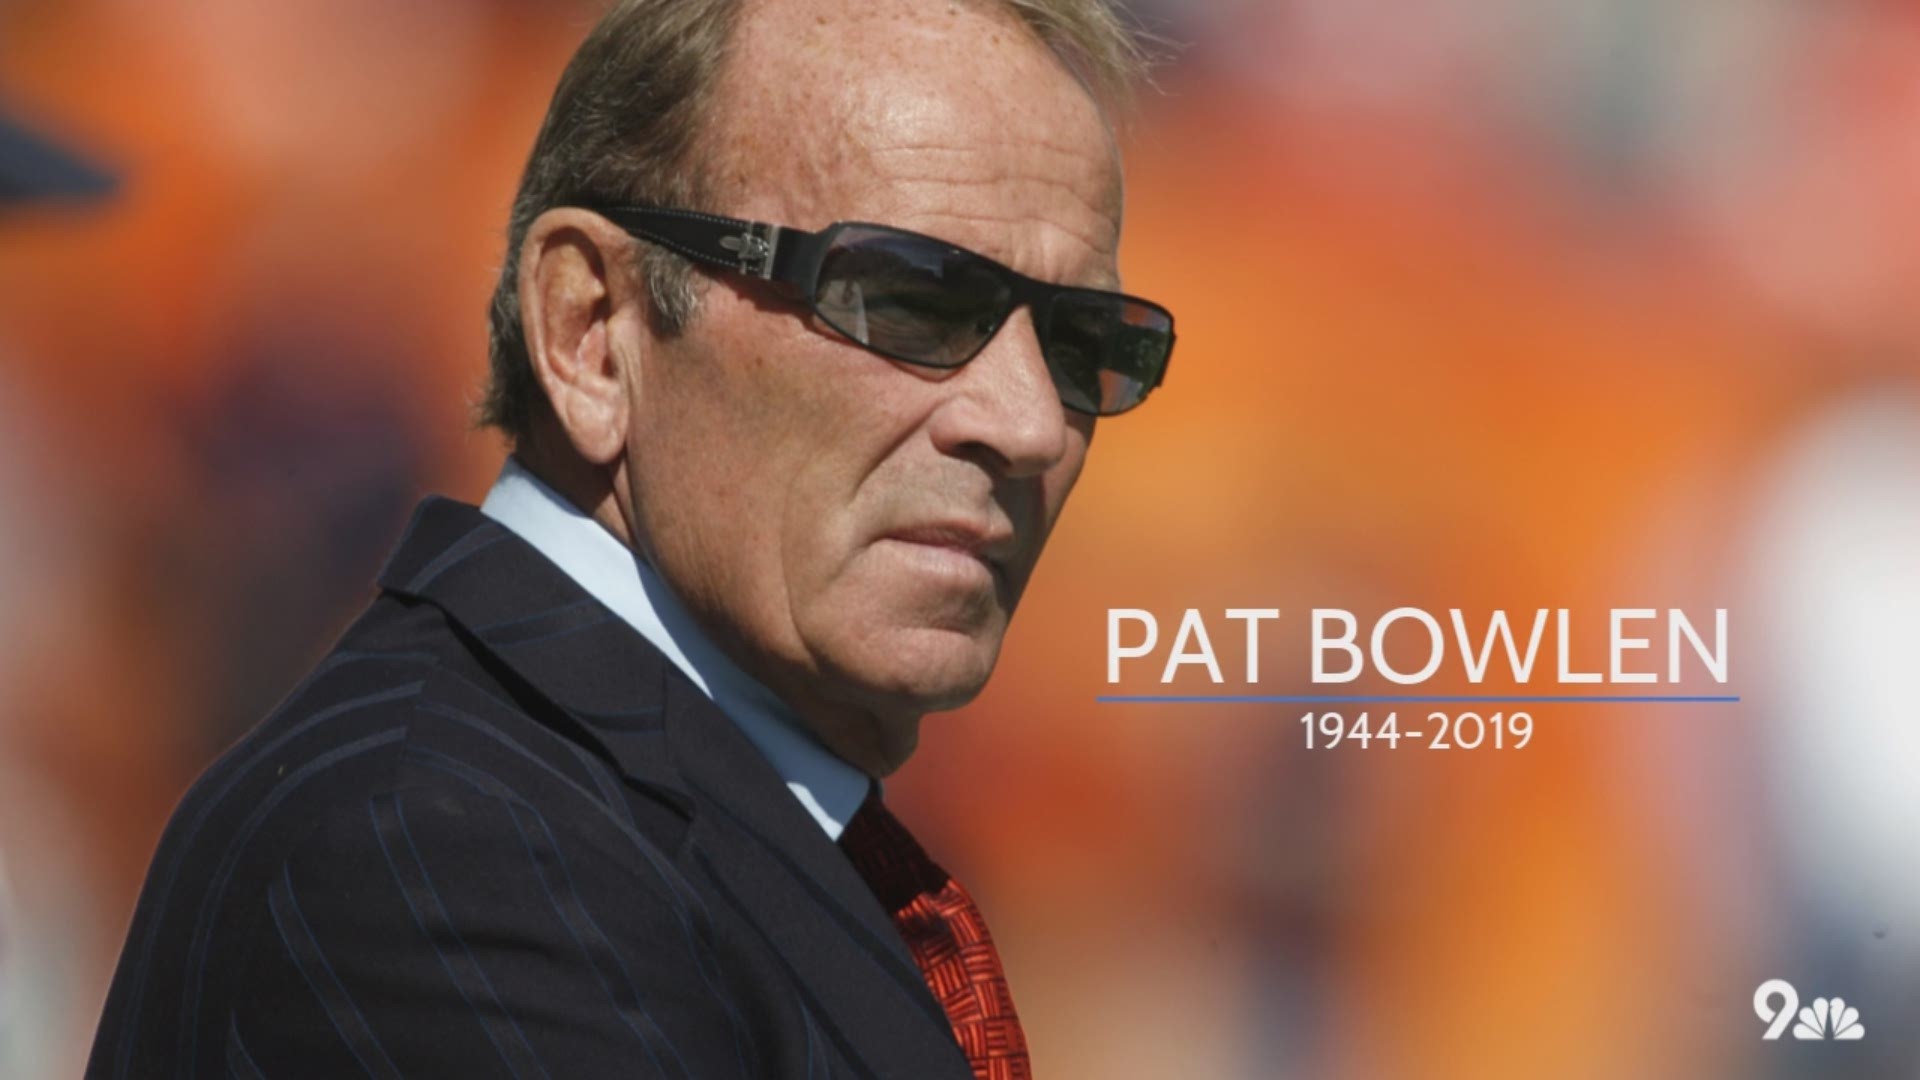 To Mr. Bowlen, it was all about the players and the coaches: it was the team. This is a look back at the Broncos under Pat Bowlen, in his own words.